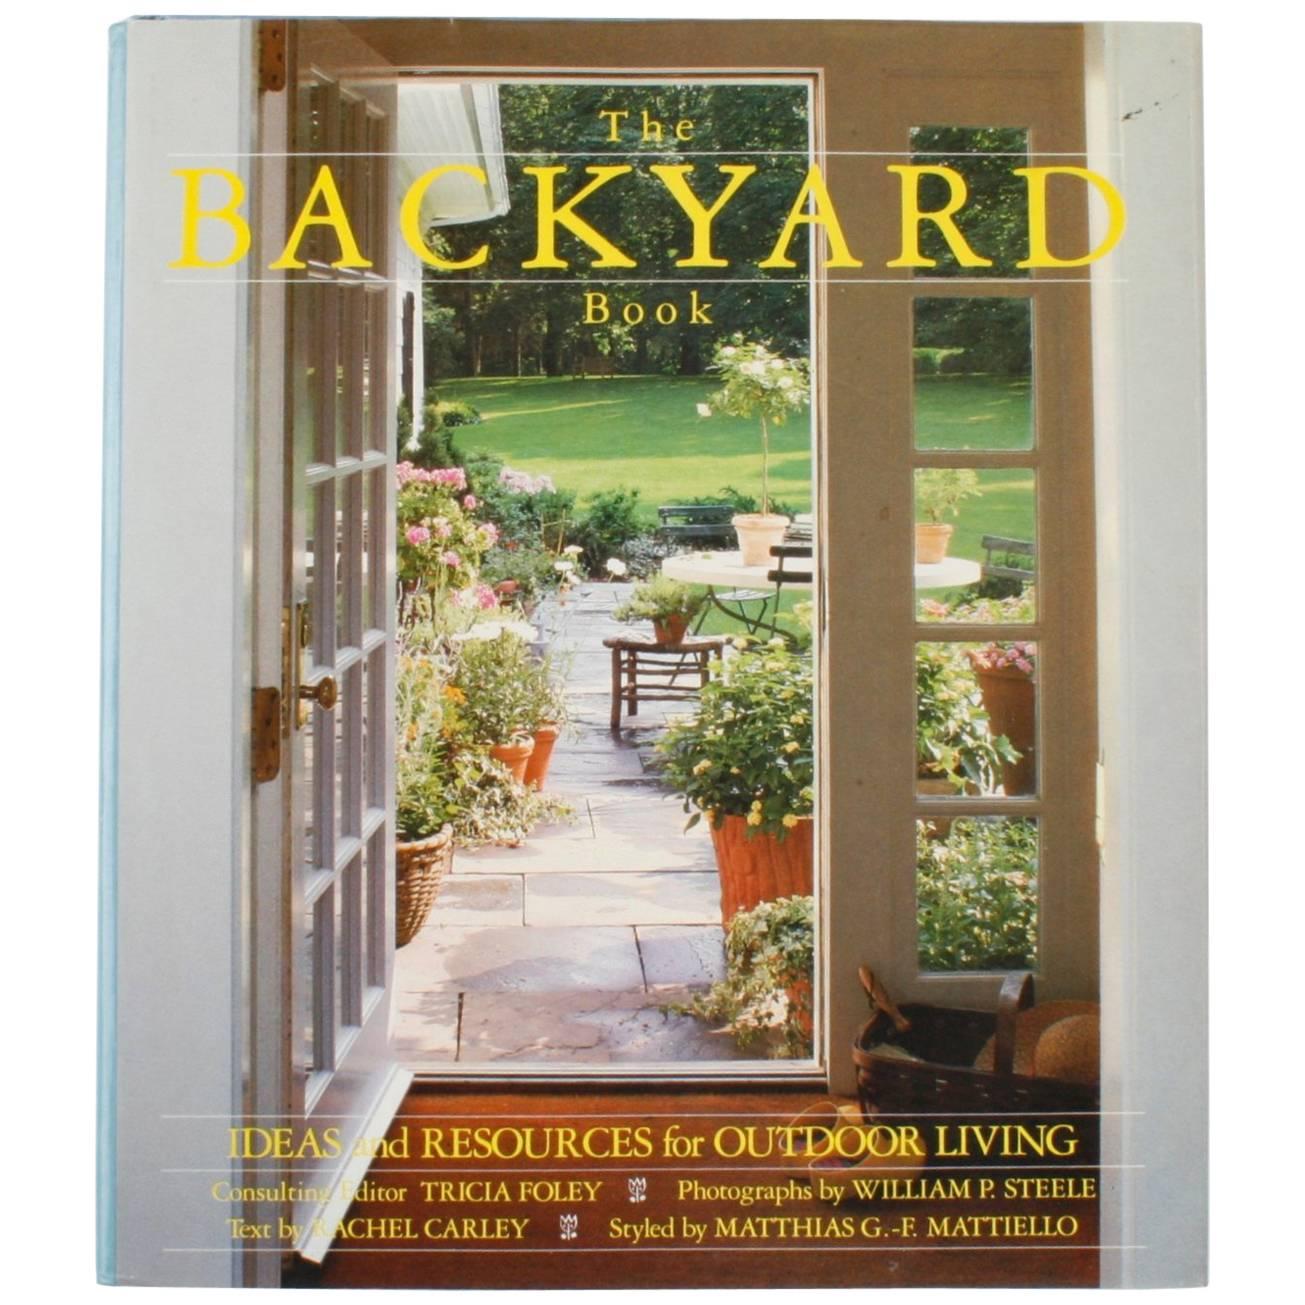 Backyard Book, Ideas and Resources for Outdoor Living